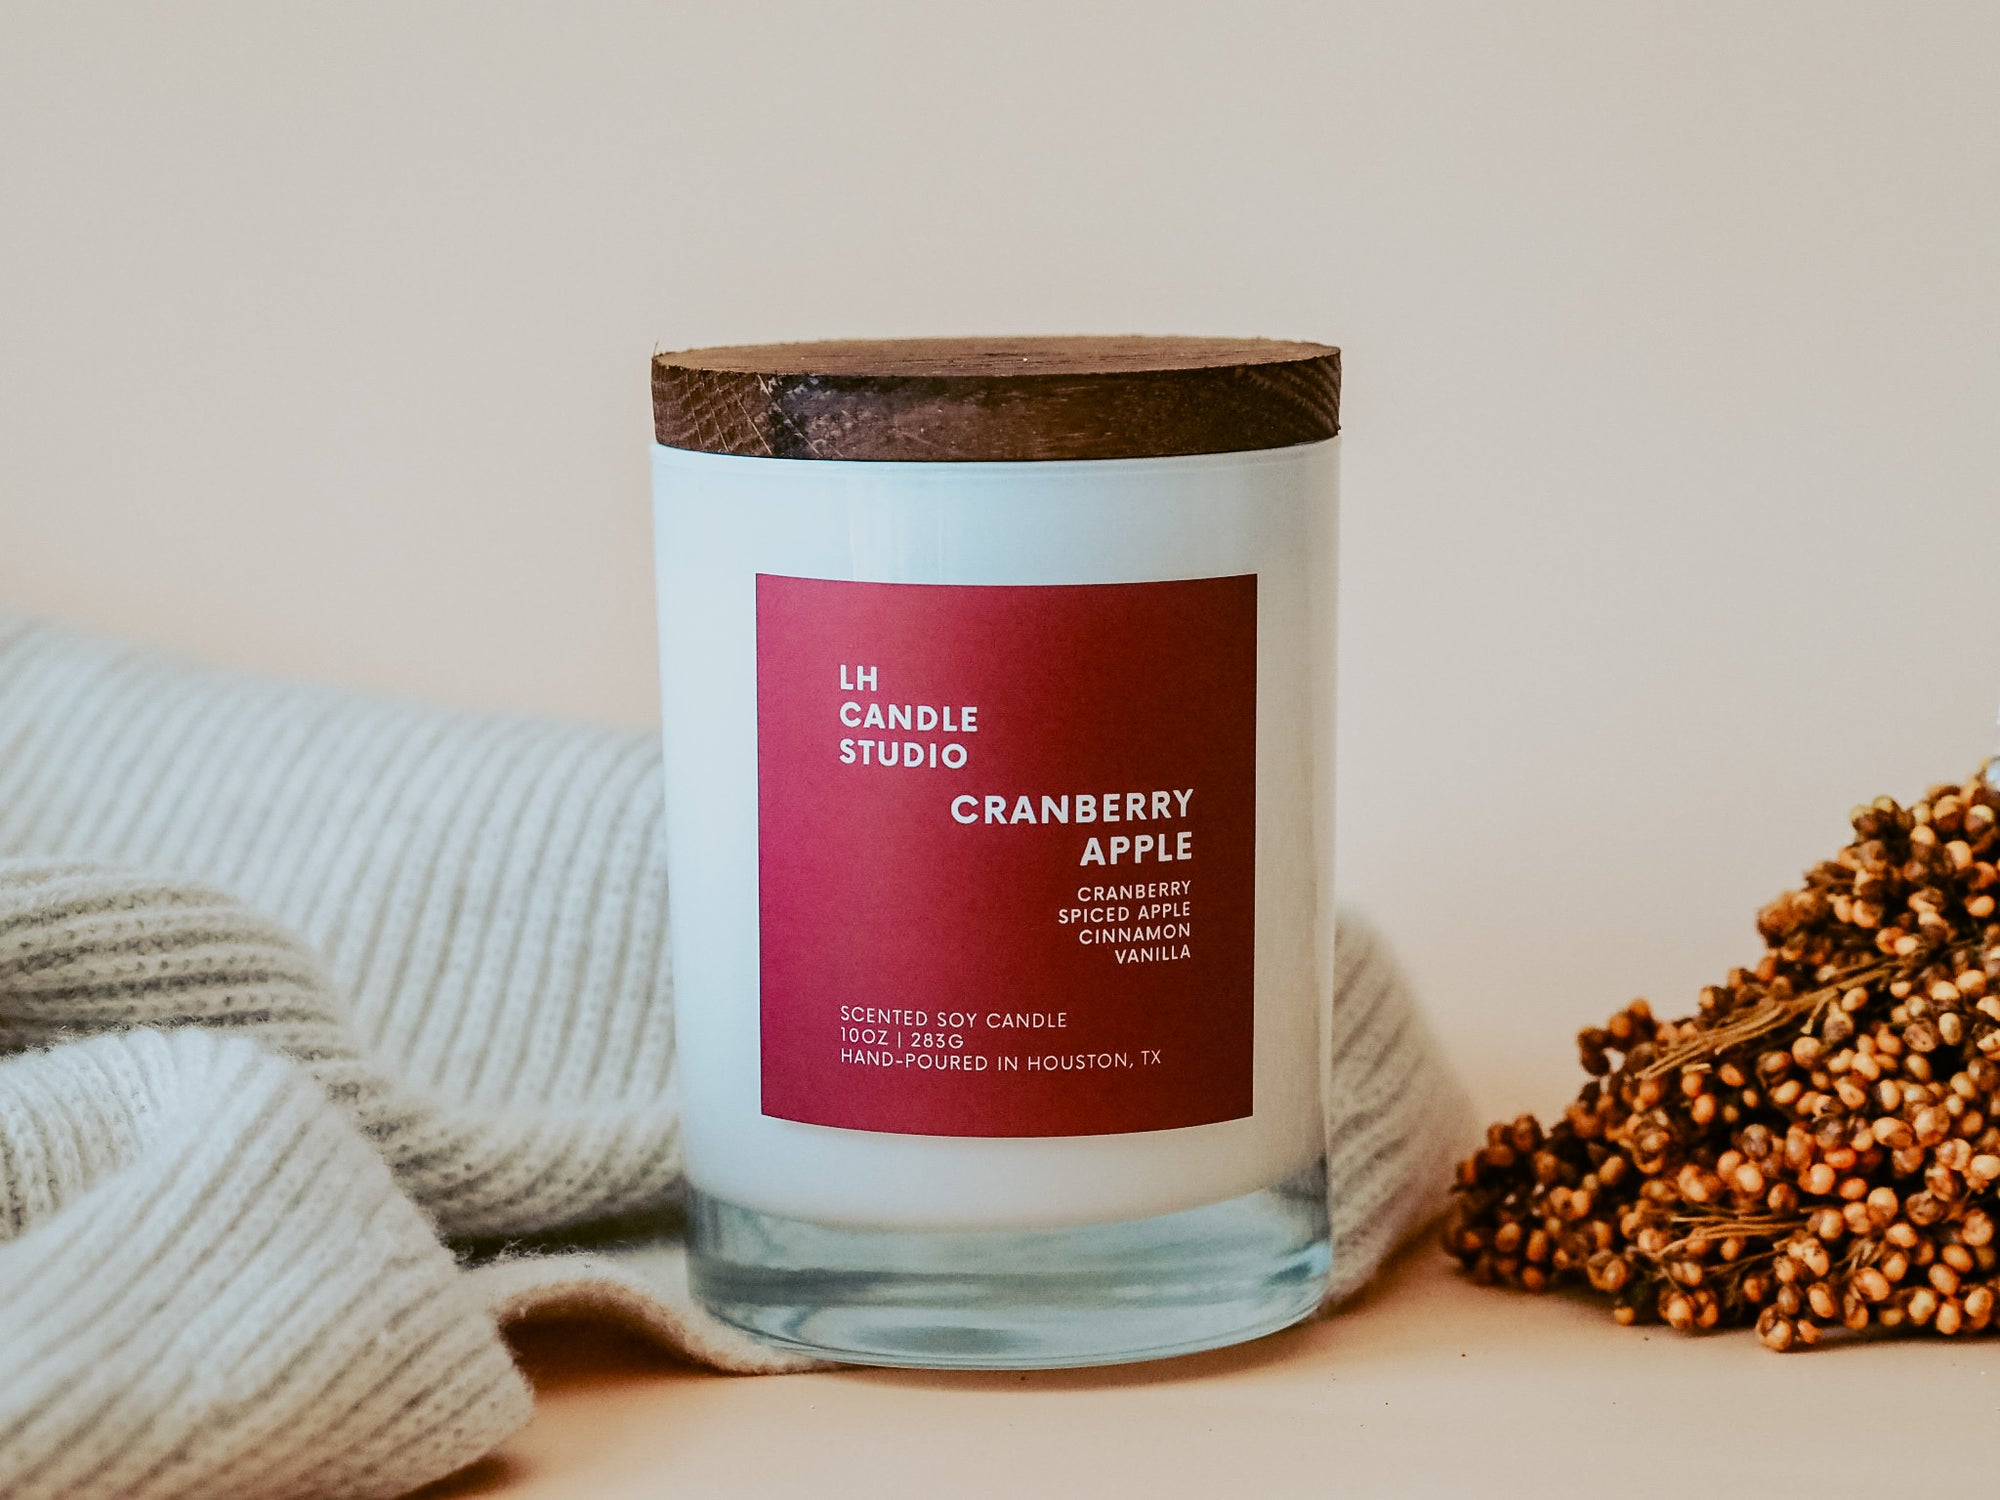 Cranberry Apple Candle - LH CANDLE STUDIO